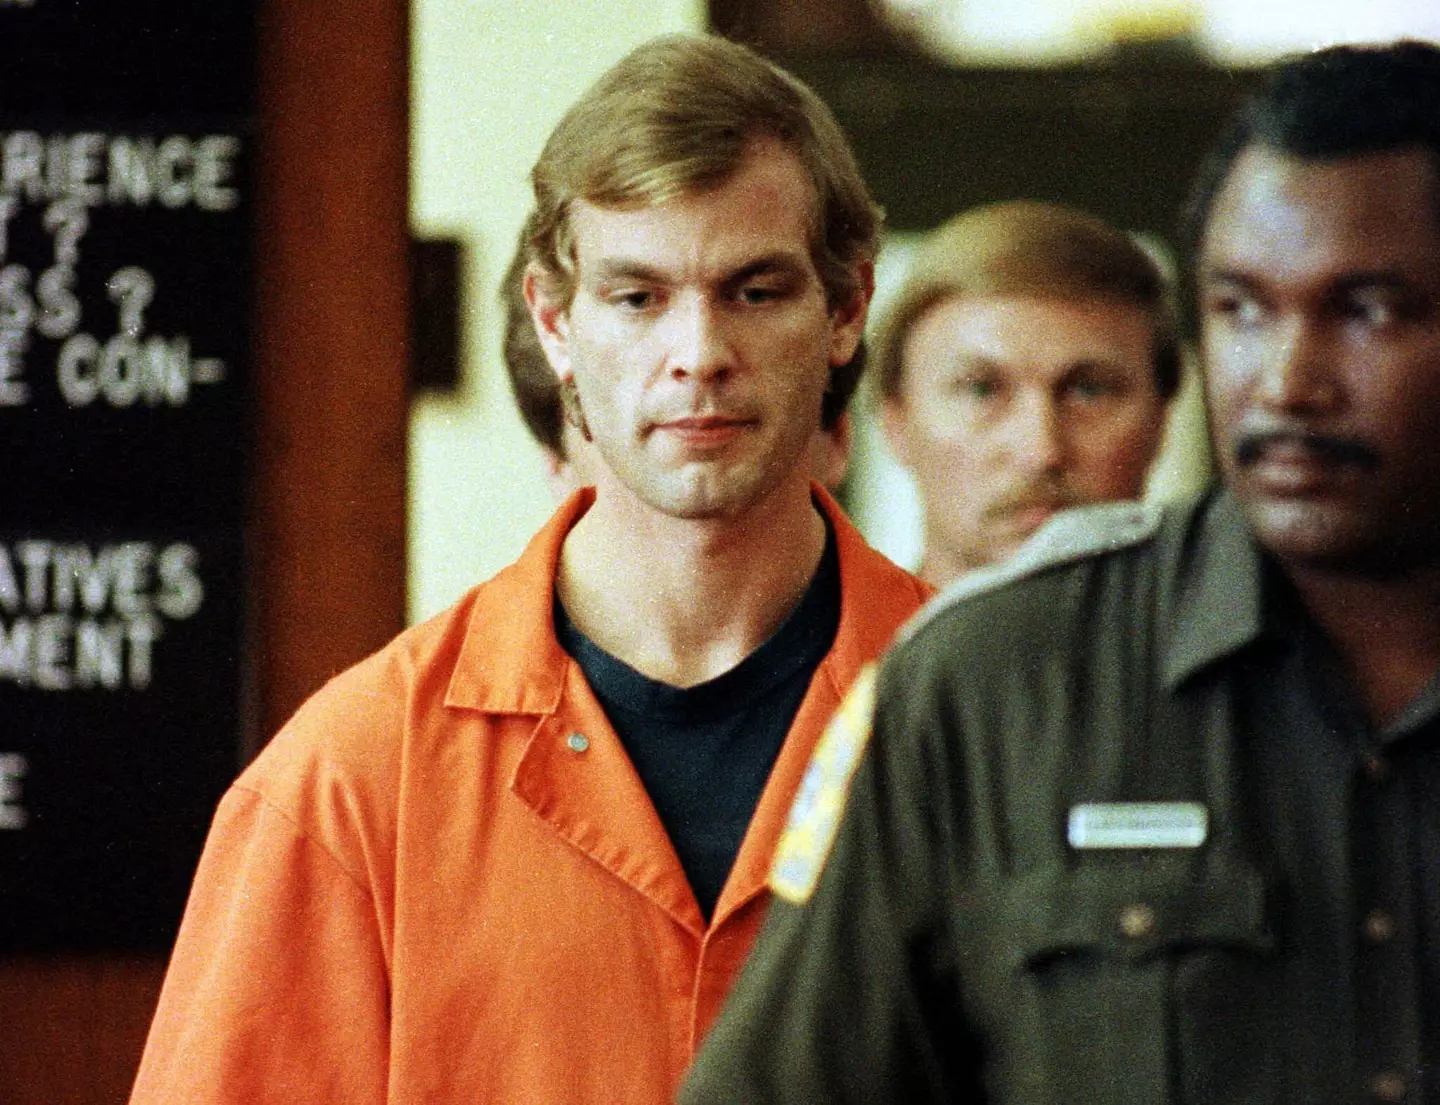 Dahmer was given 15 life sentences for his crimes.